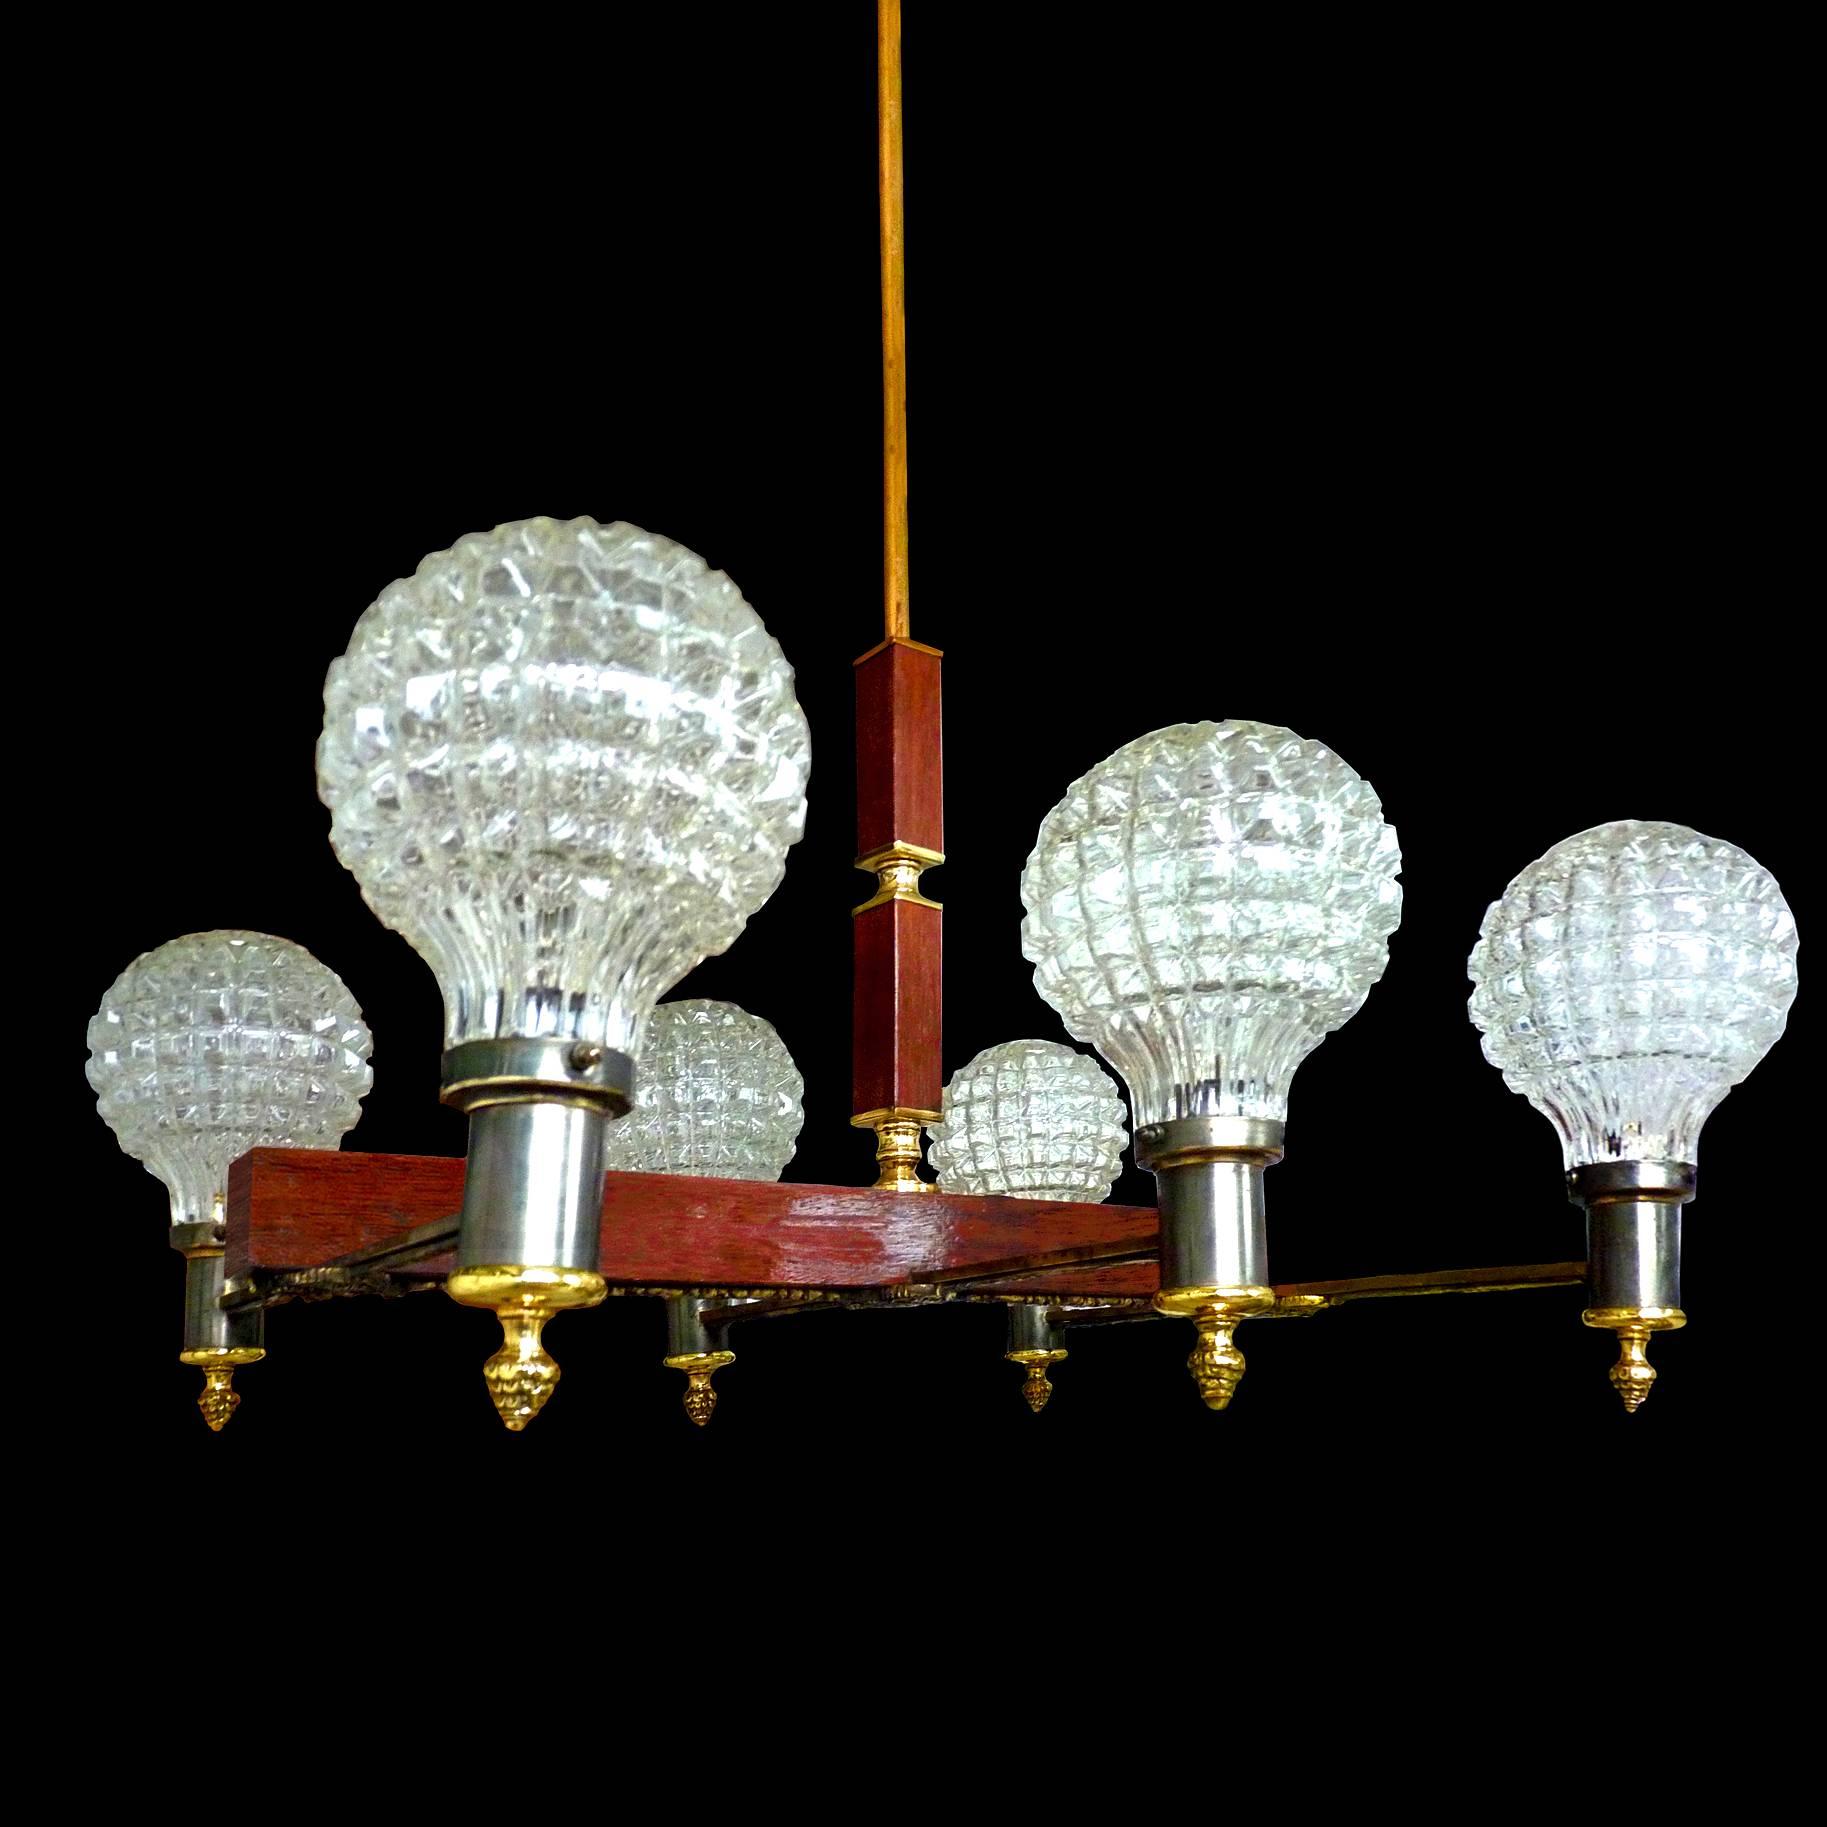 Unusual French Art Deco in engraved bronze and brass on wood with 6-light ice glass shades chandelier, circa 1940.
  